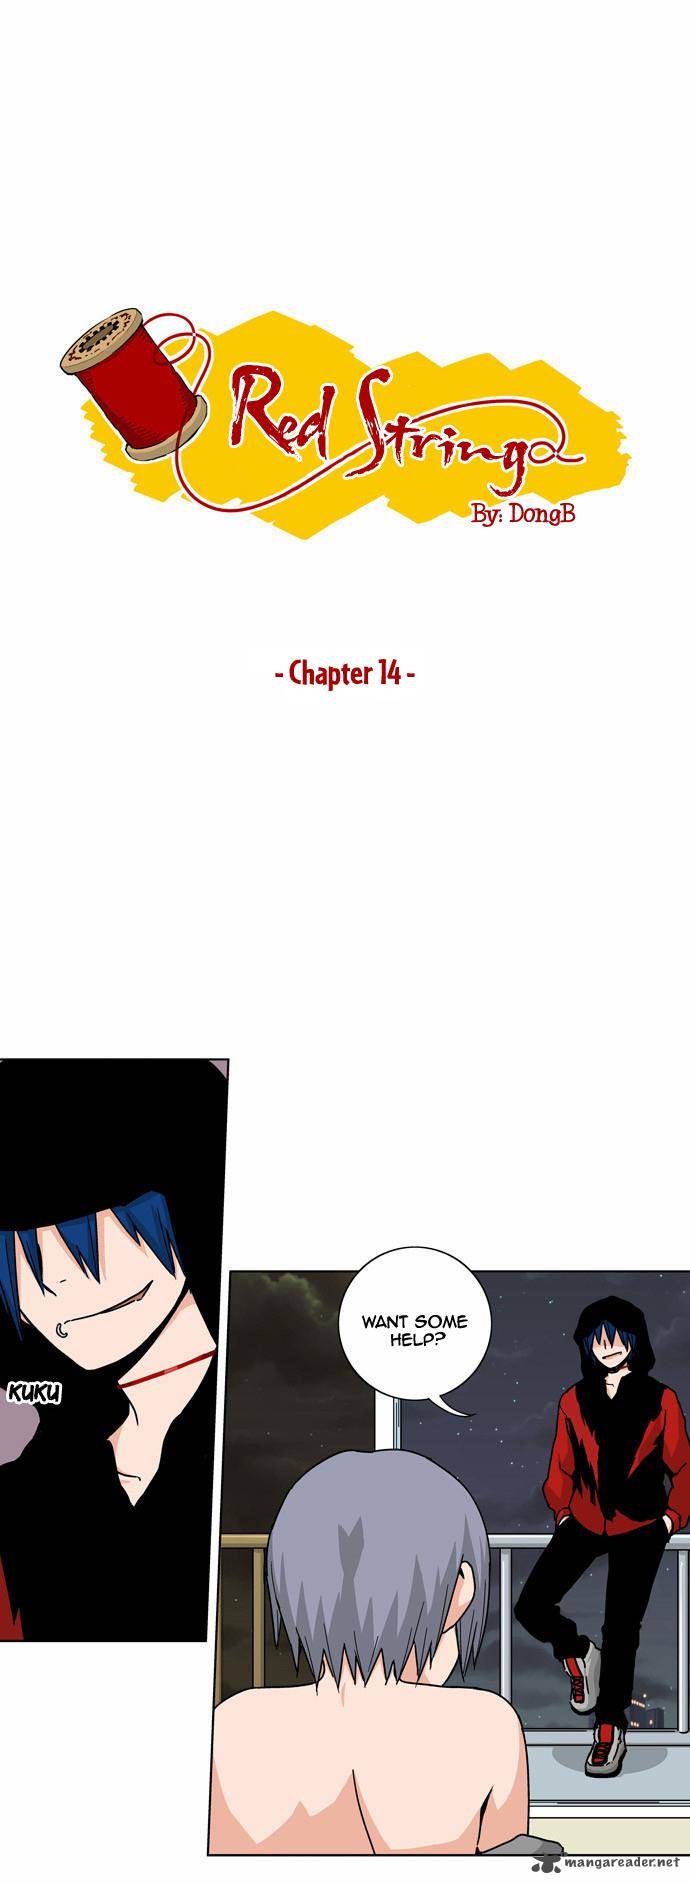 Red String Dong Bi Chapter 14 Page 2